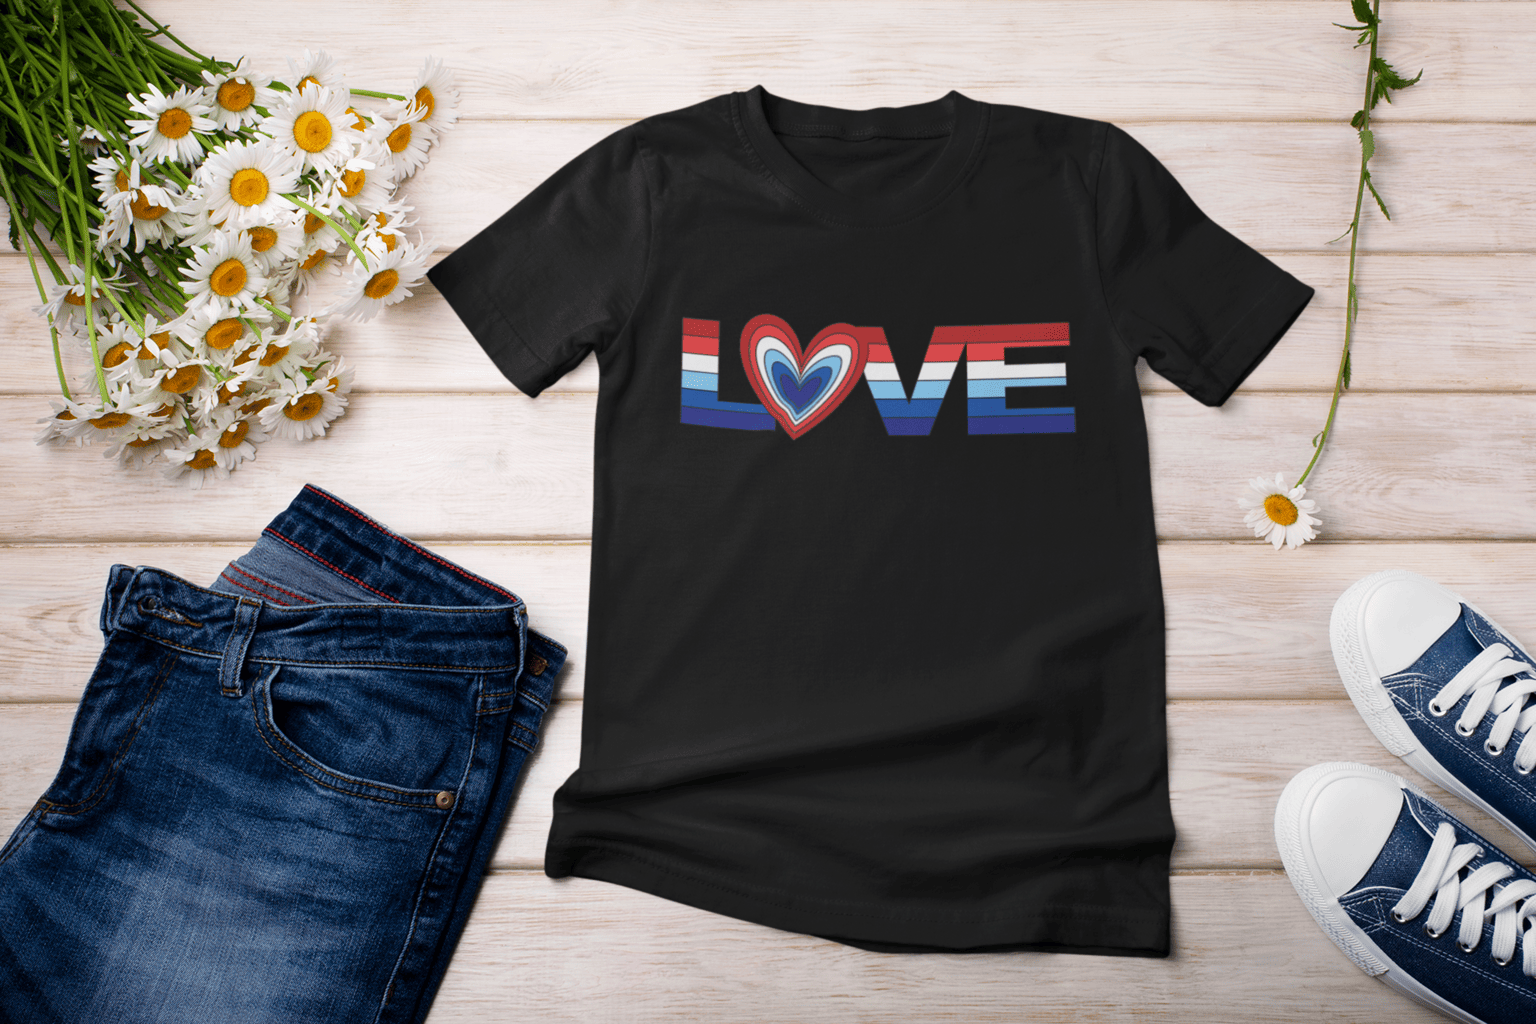 Red, white and blue LOVE cut file design on a t-shirt